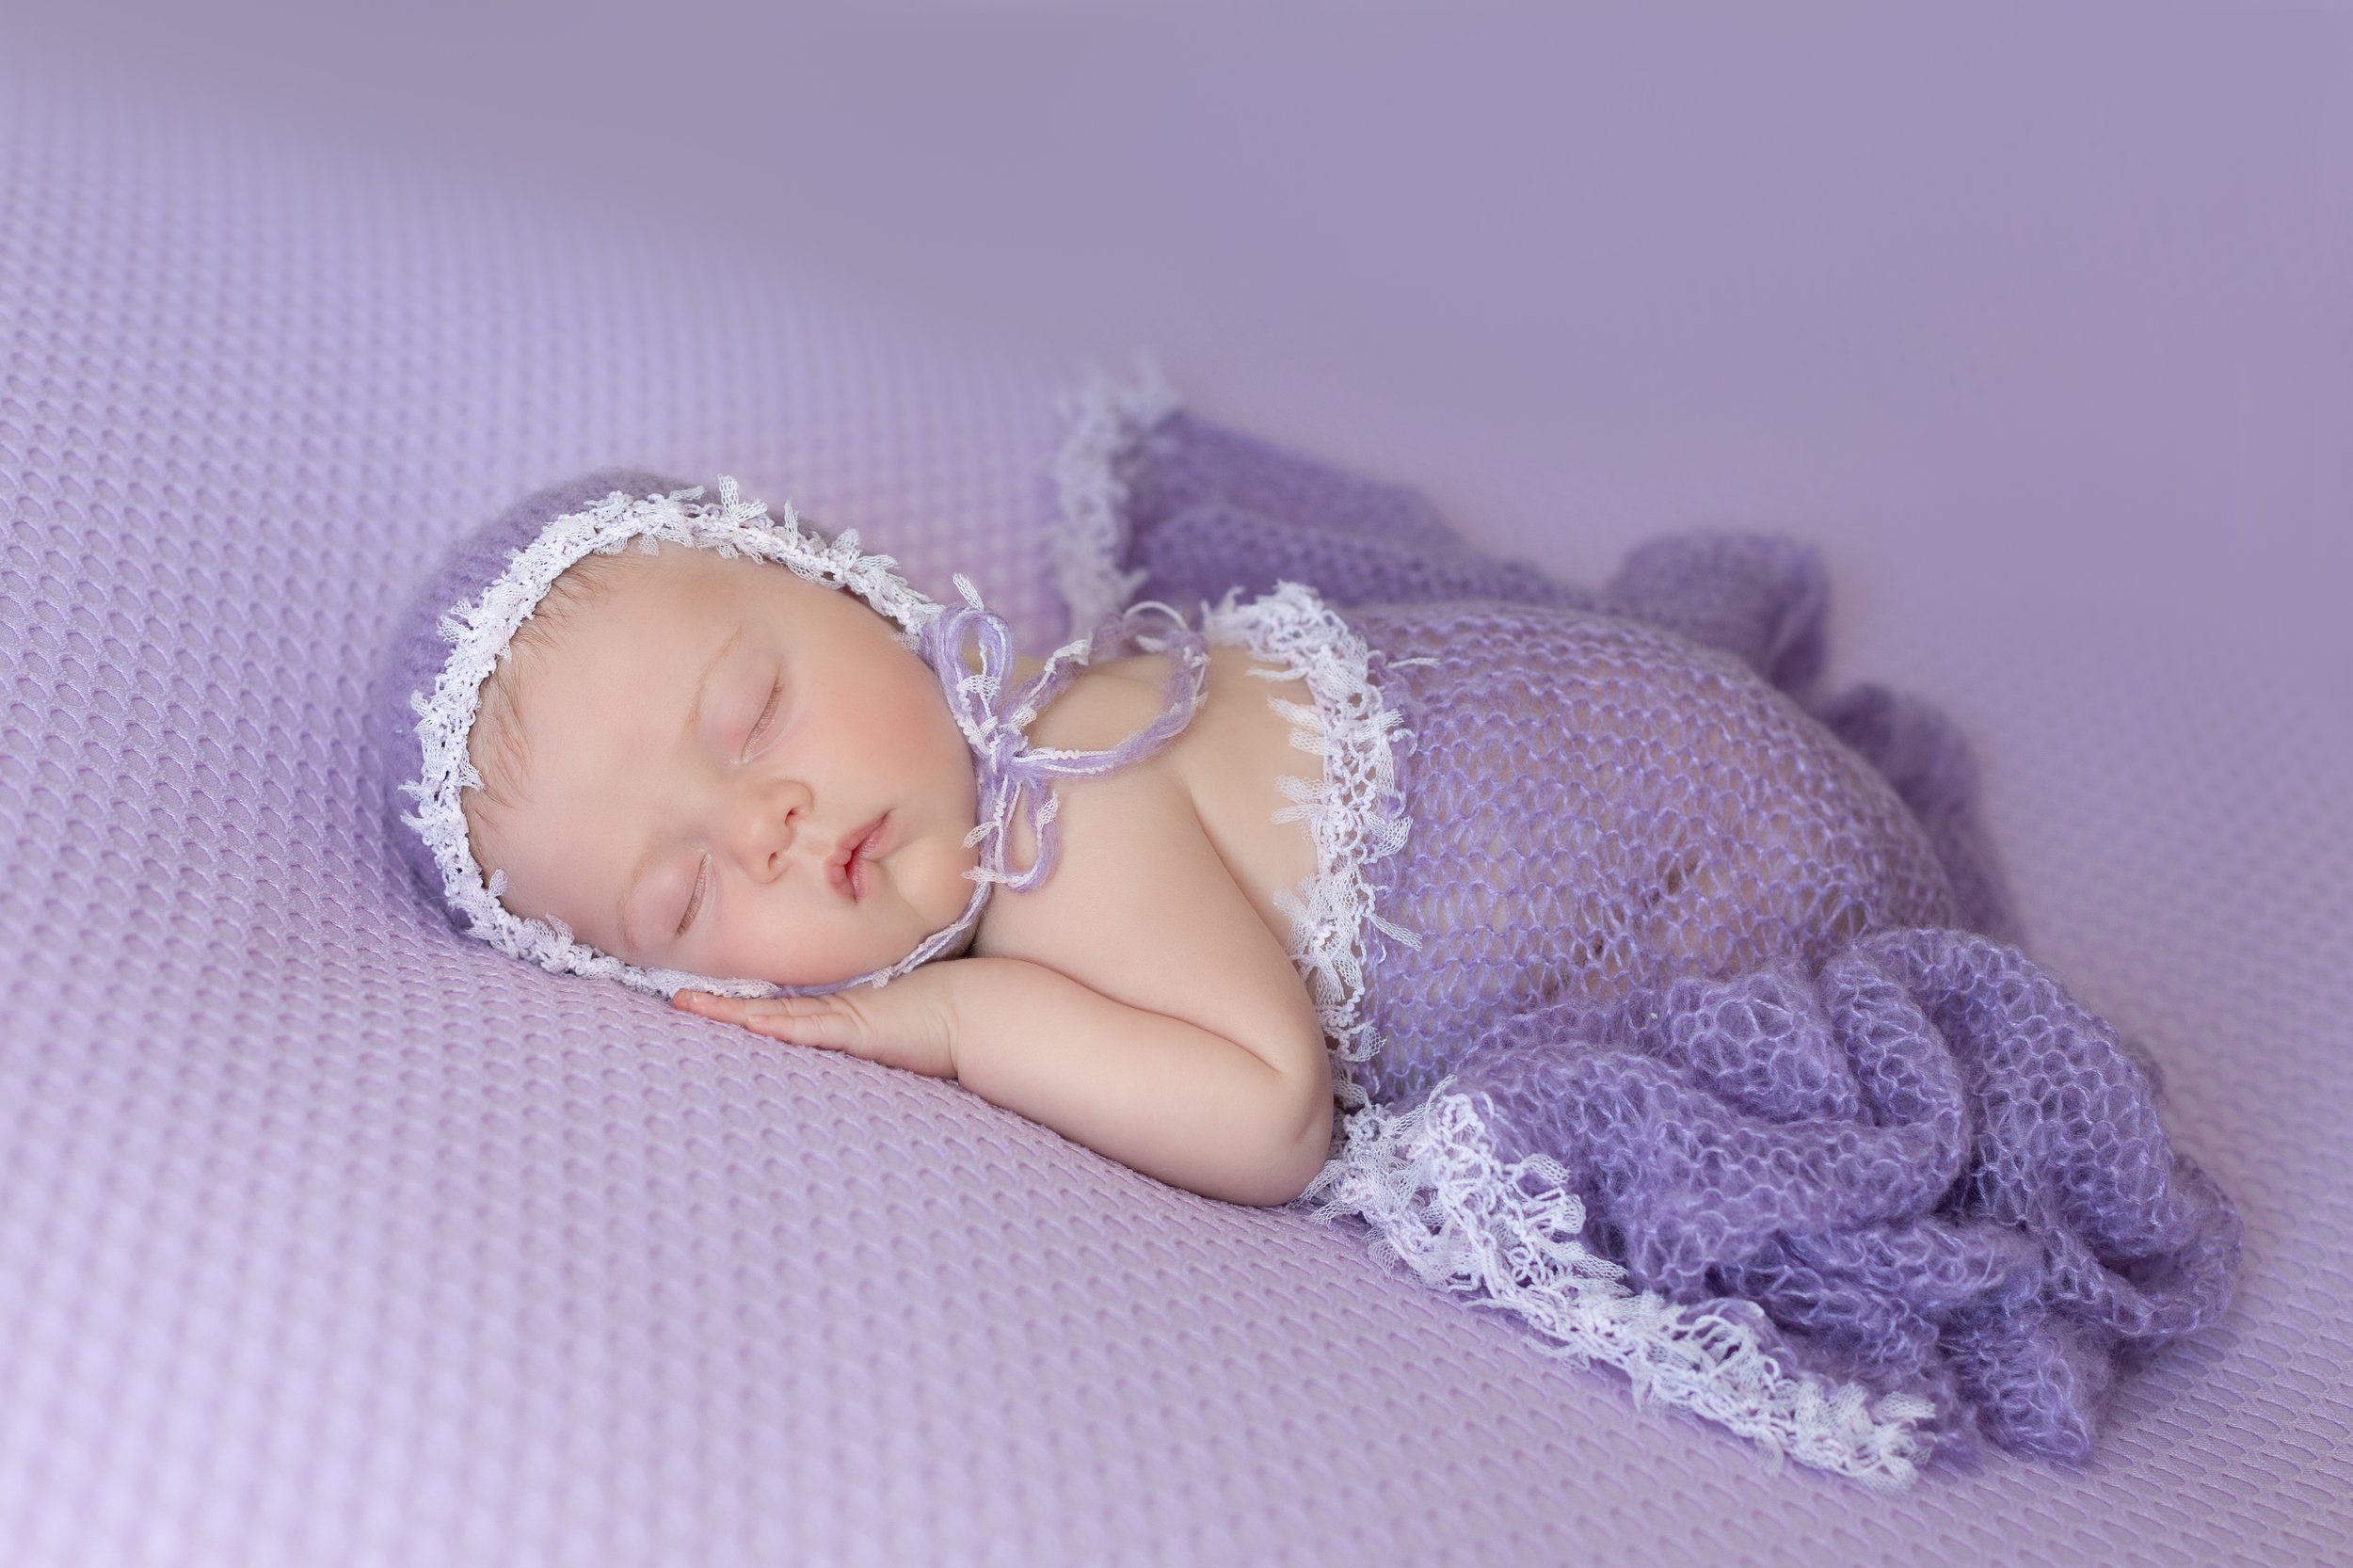 baby photo of girl wearing frilly bonnet covered in a blanket